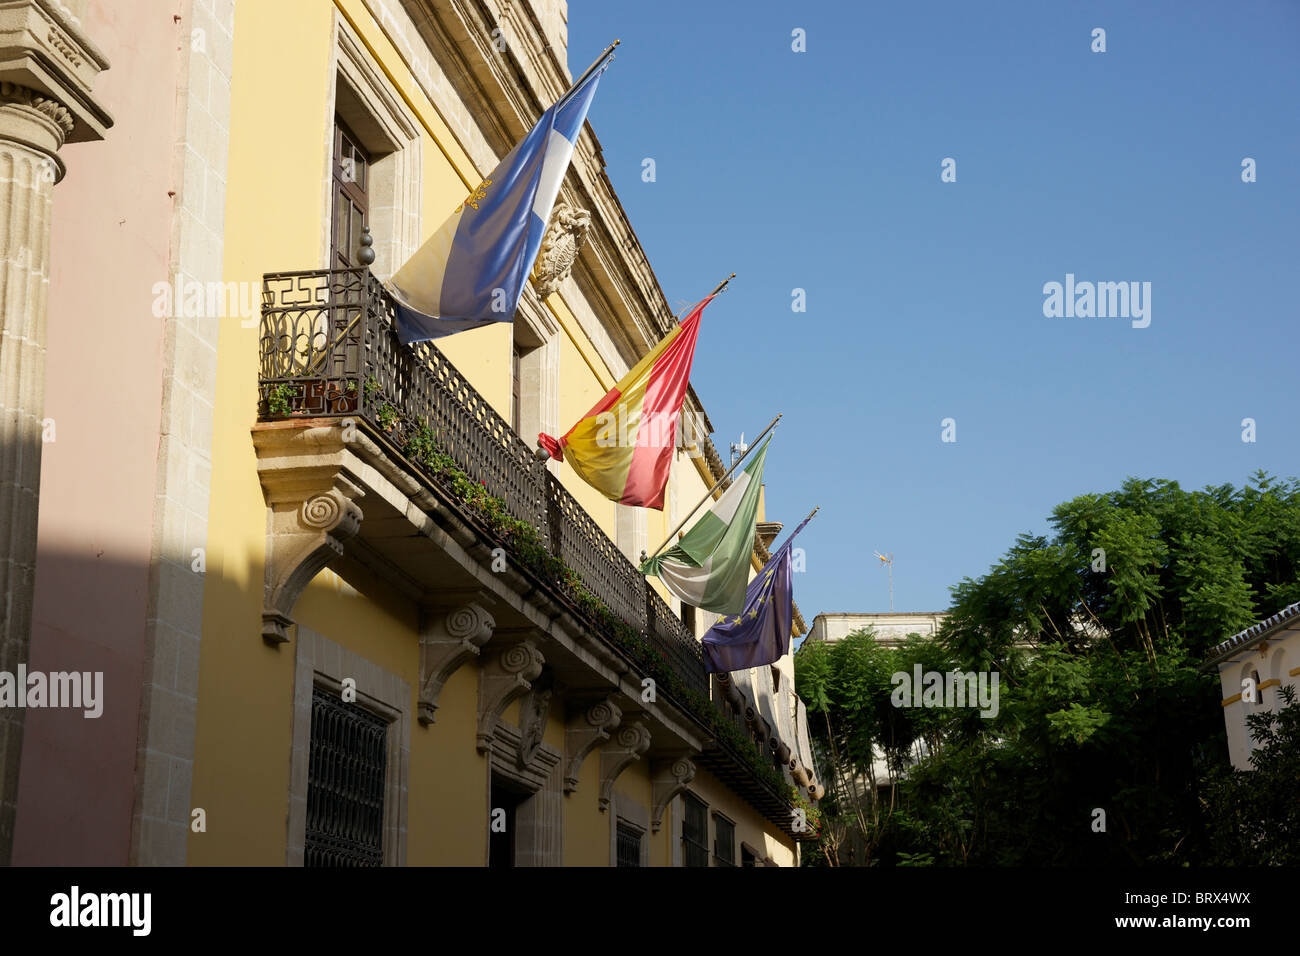 Flags flying on a building in Jerez. Stock Photo